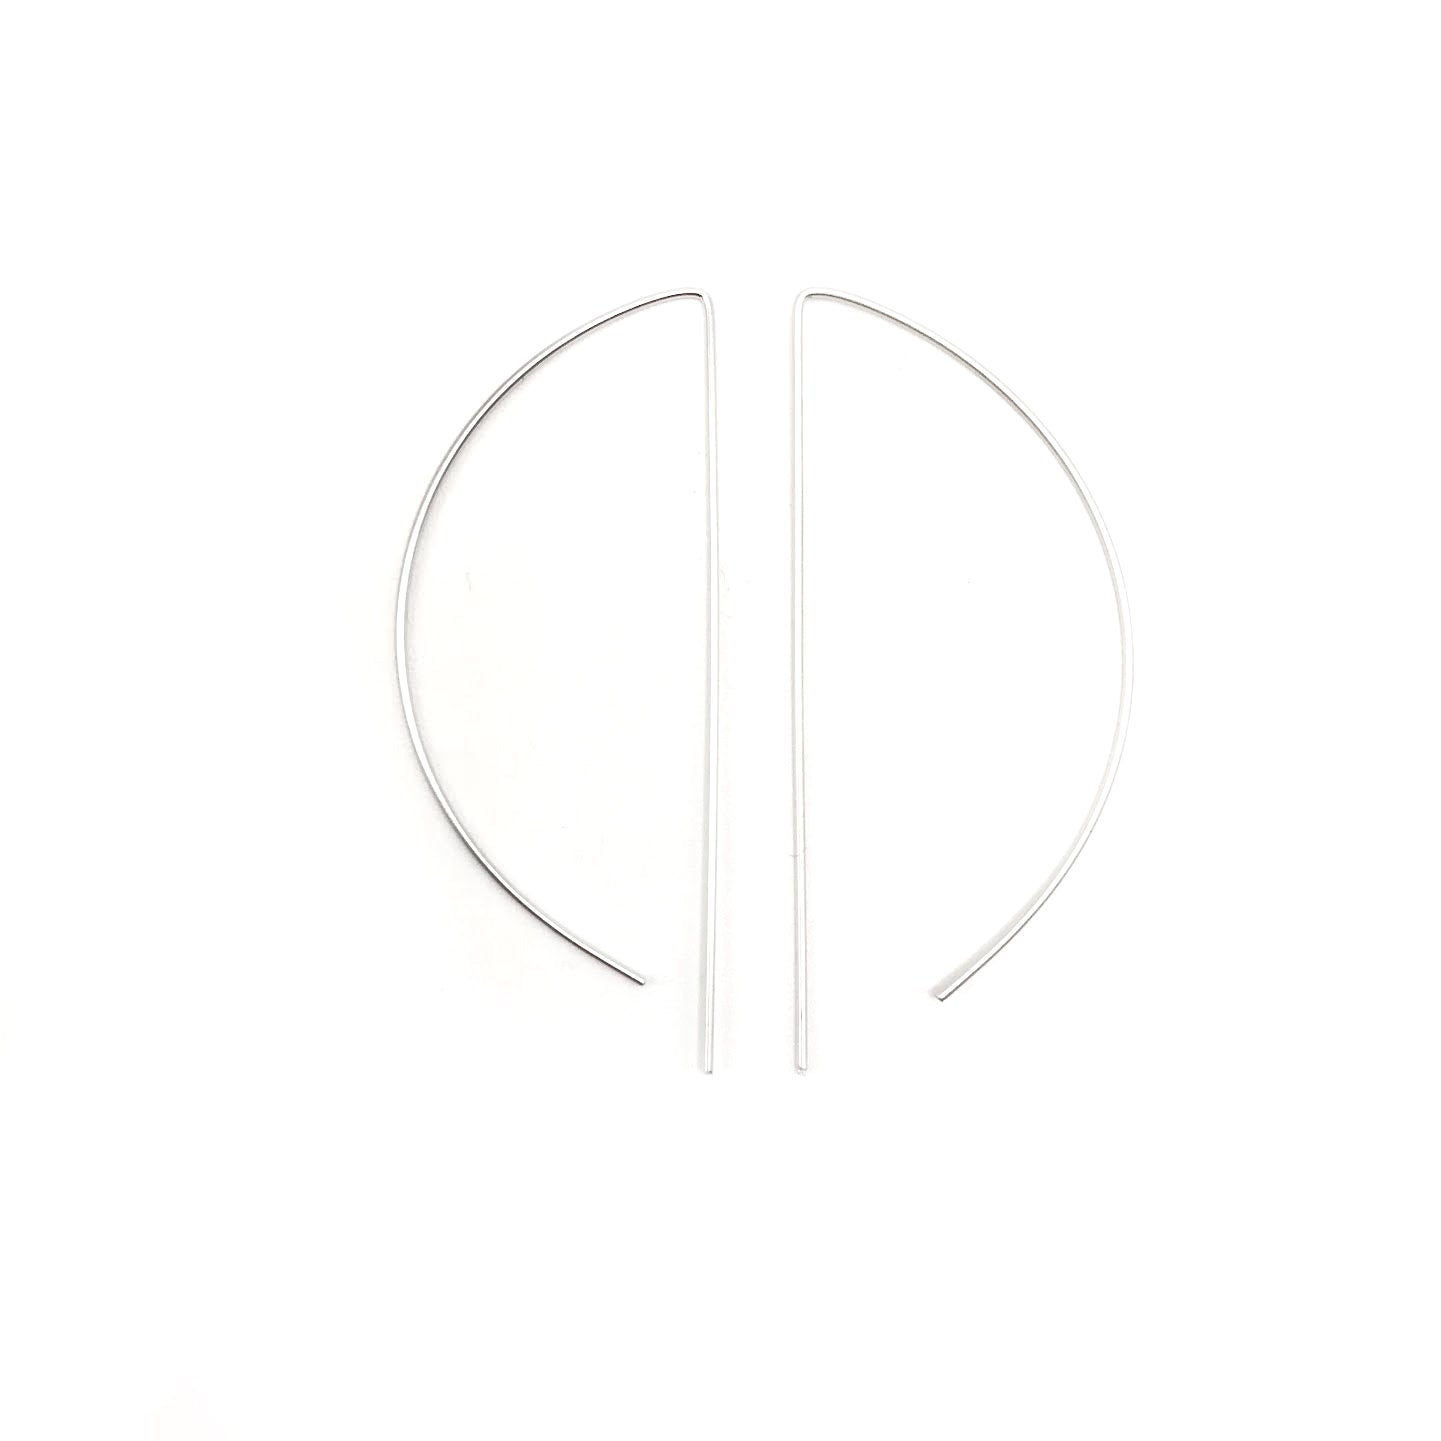 Ultra thin elipse earrings on white background